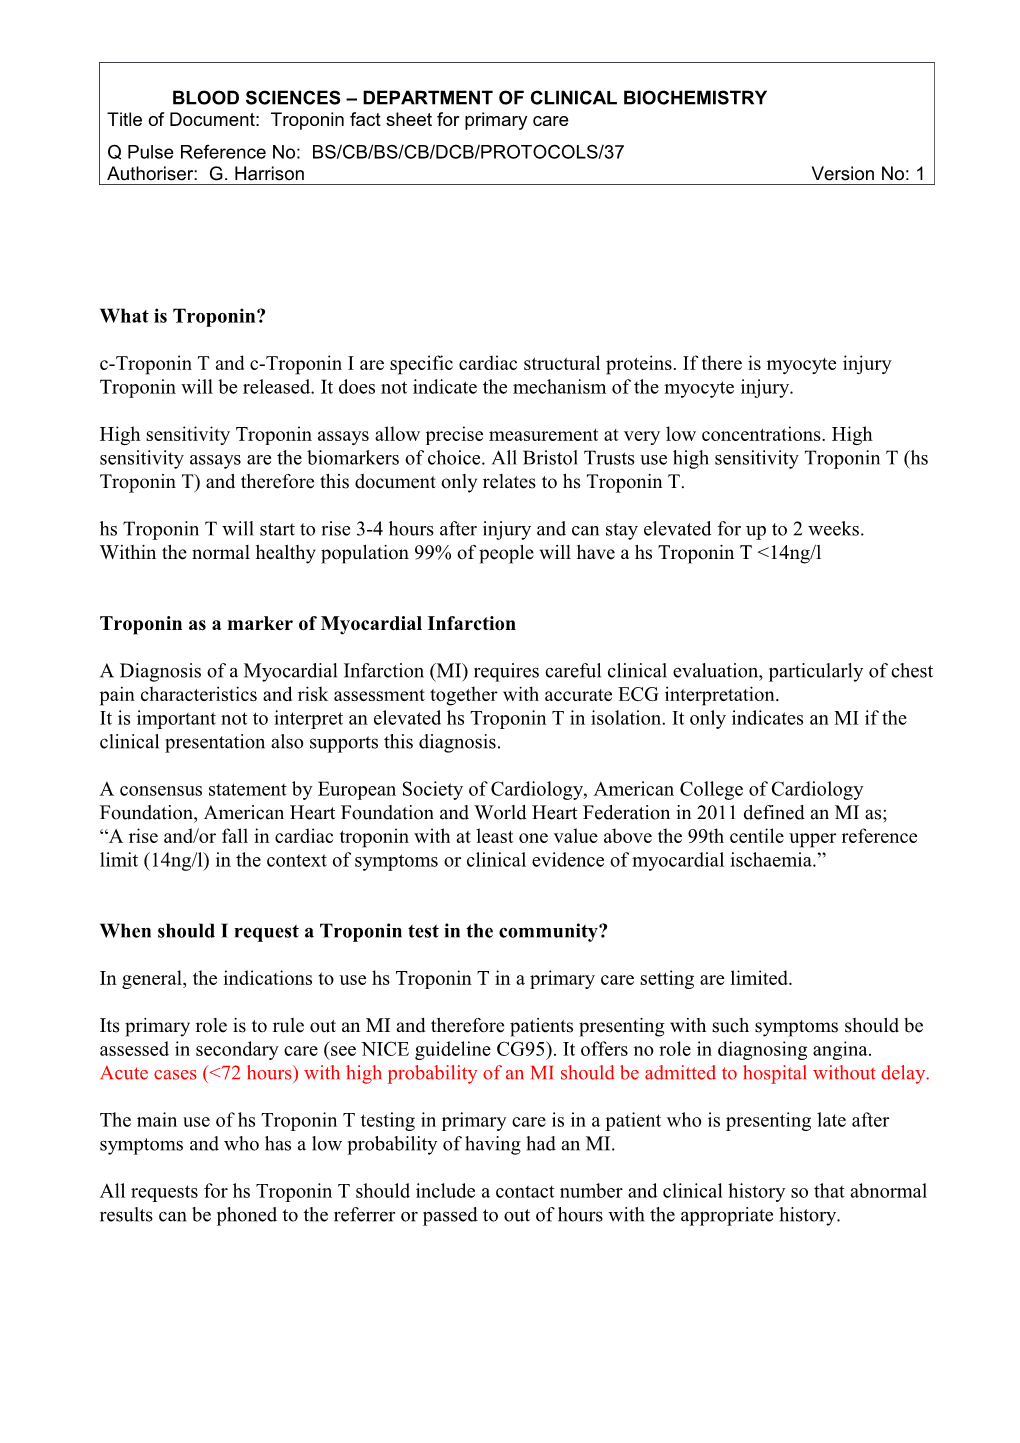 Title of Document: Troponin Fact Sheet for Primary Care